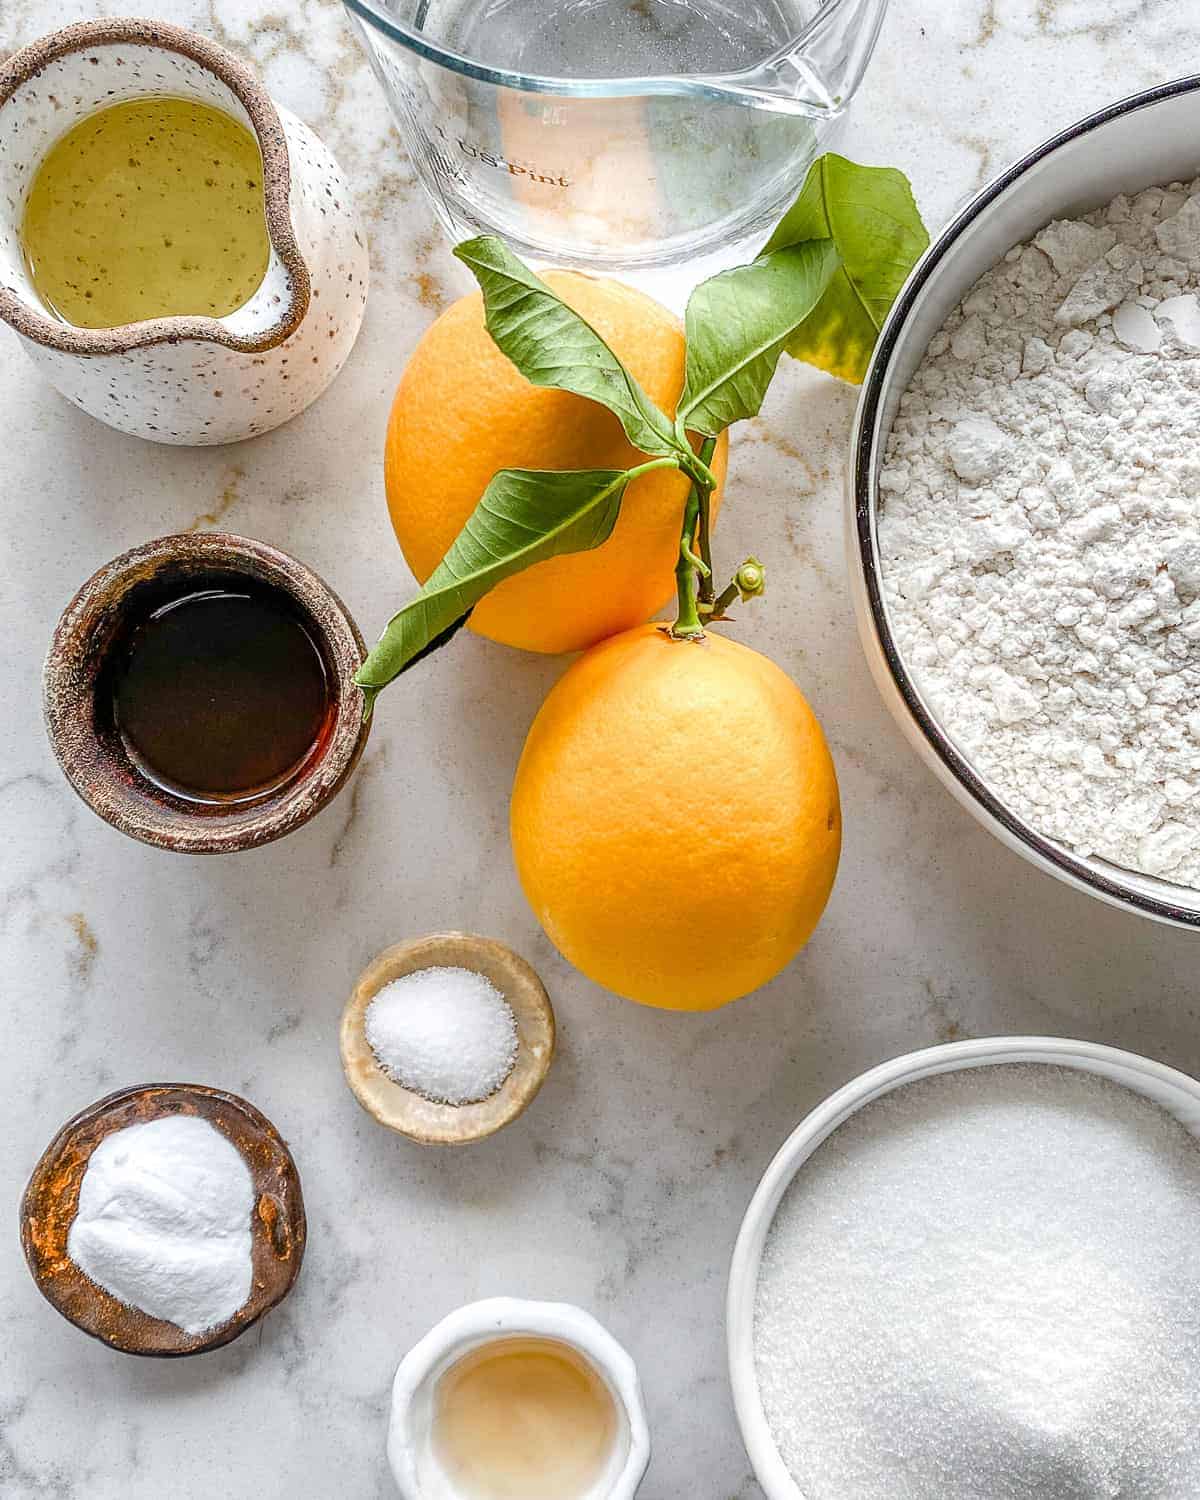 ingredients for lemon cupcakes measured out against a white surface